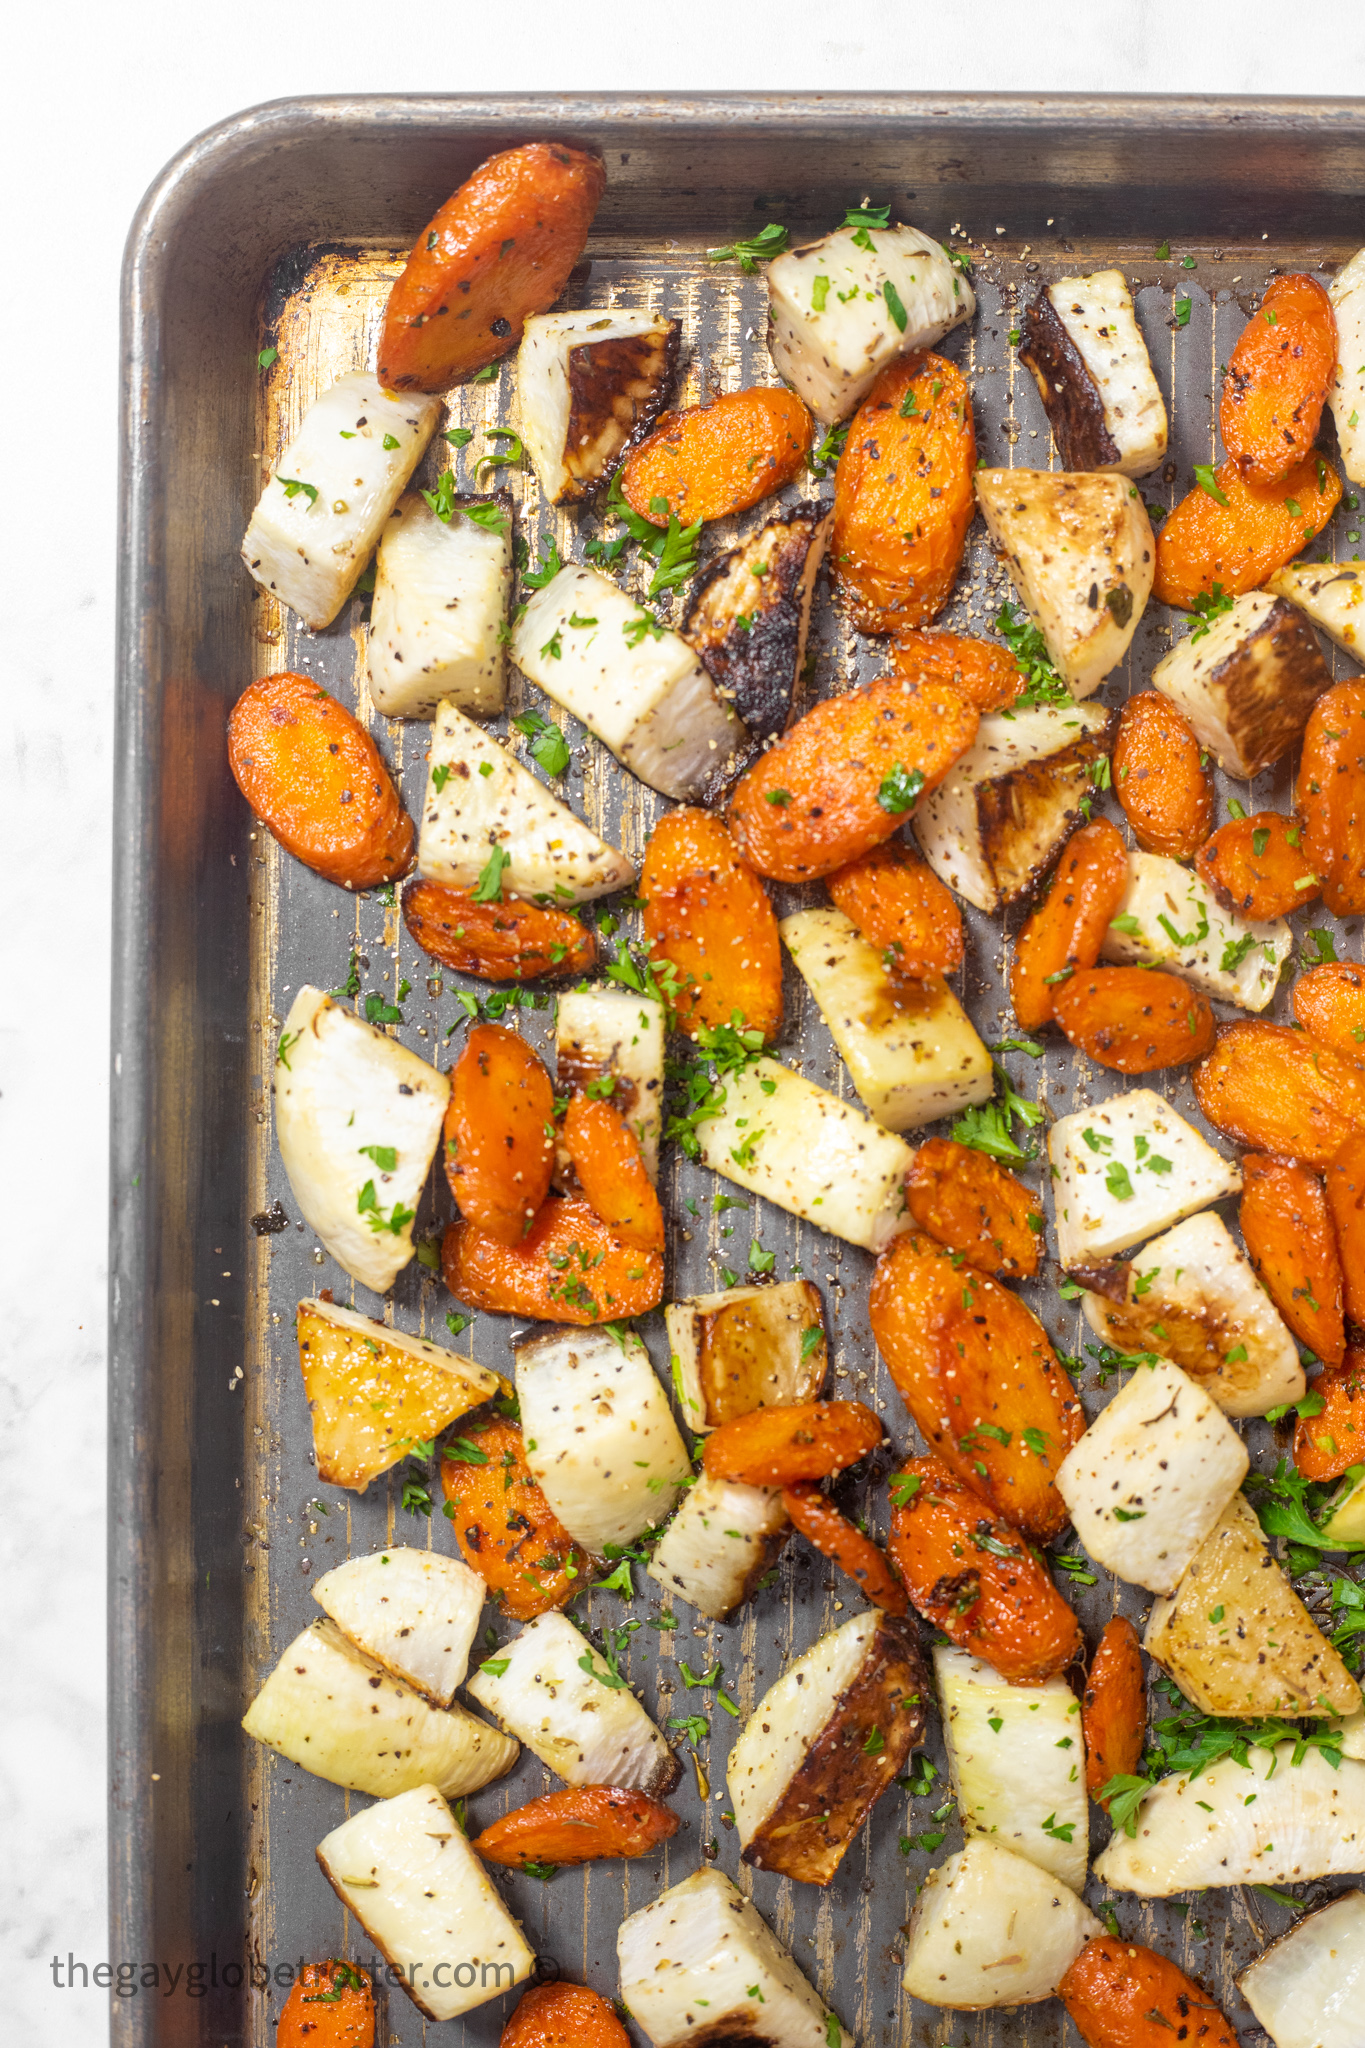 A baking sheet with roasted turnips and carrots.